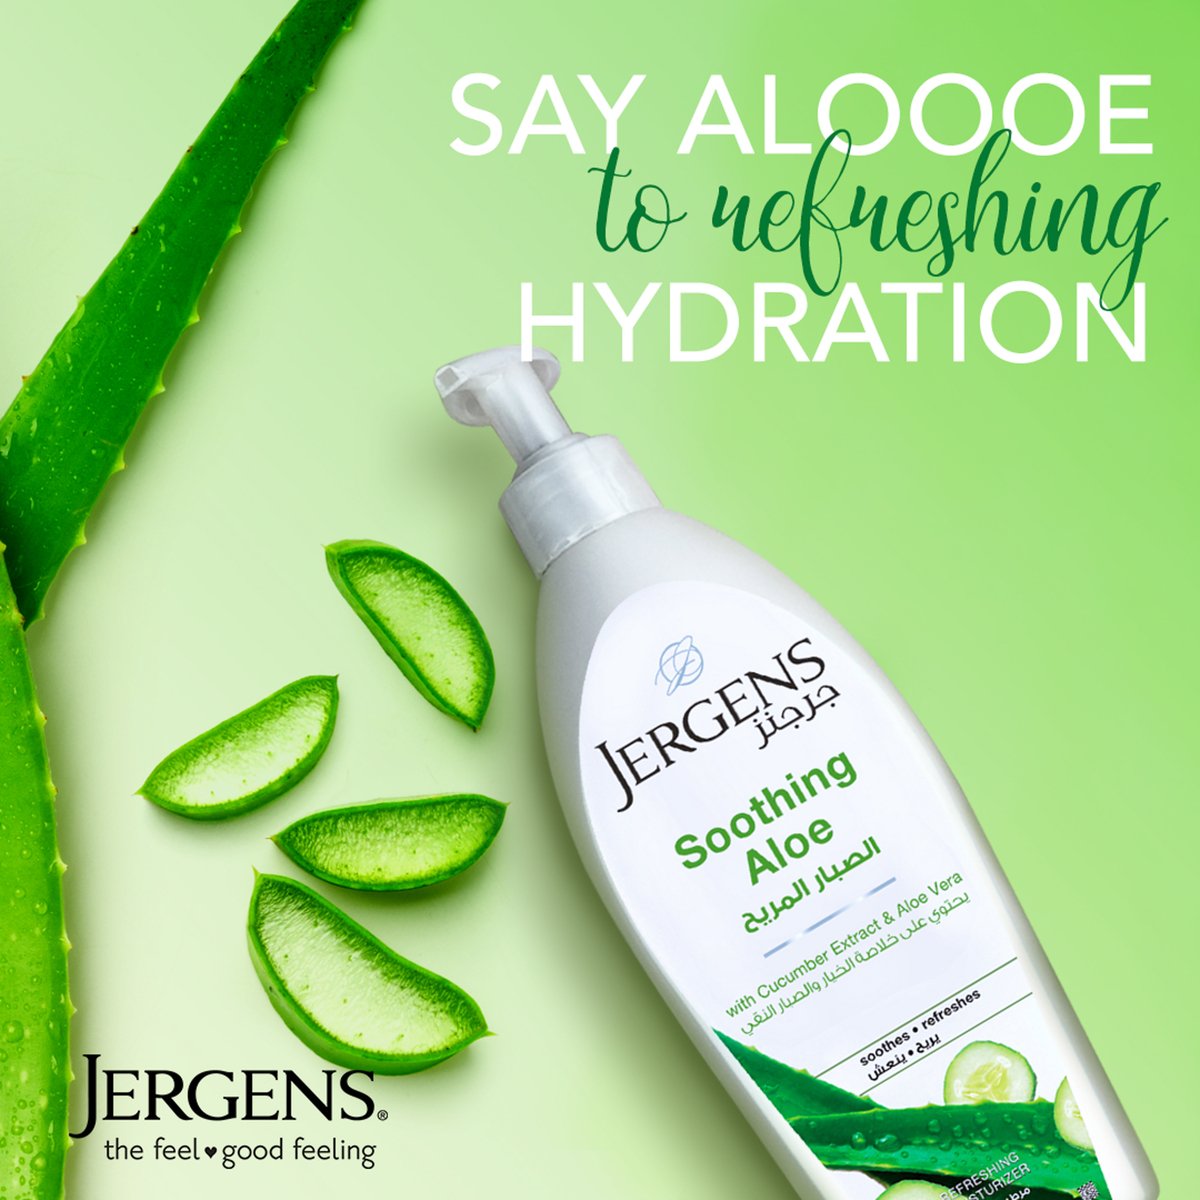 Jergens Body Lotion Soothing Aloe, 200 ml